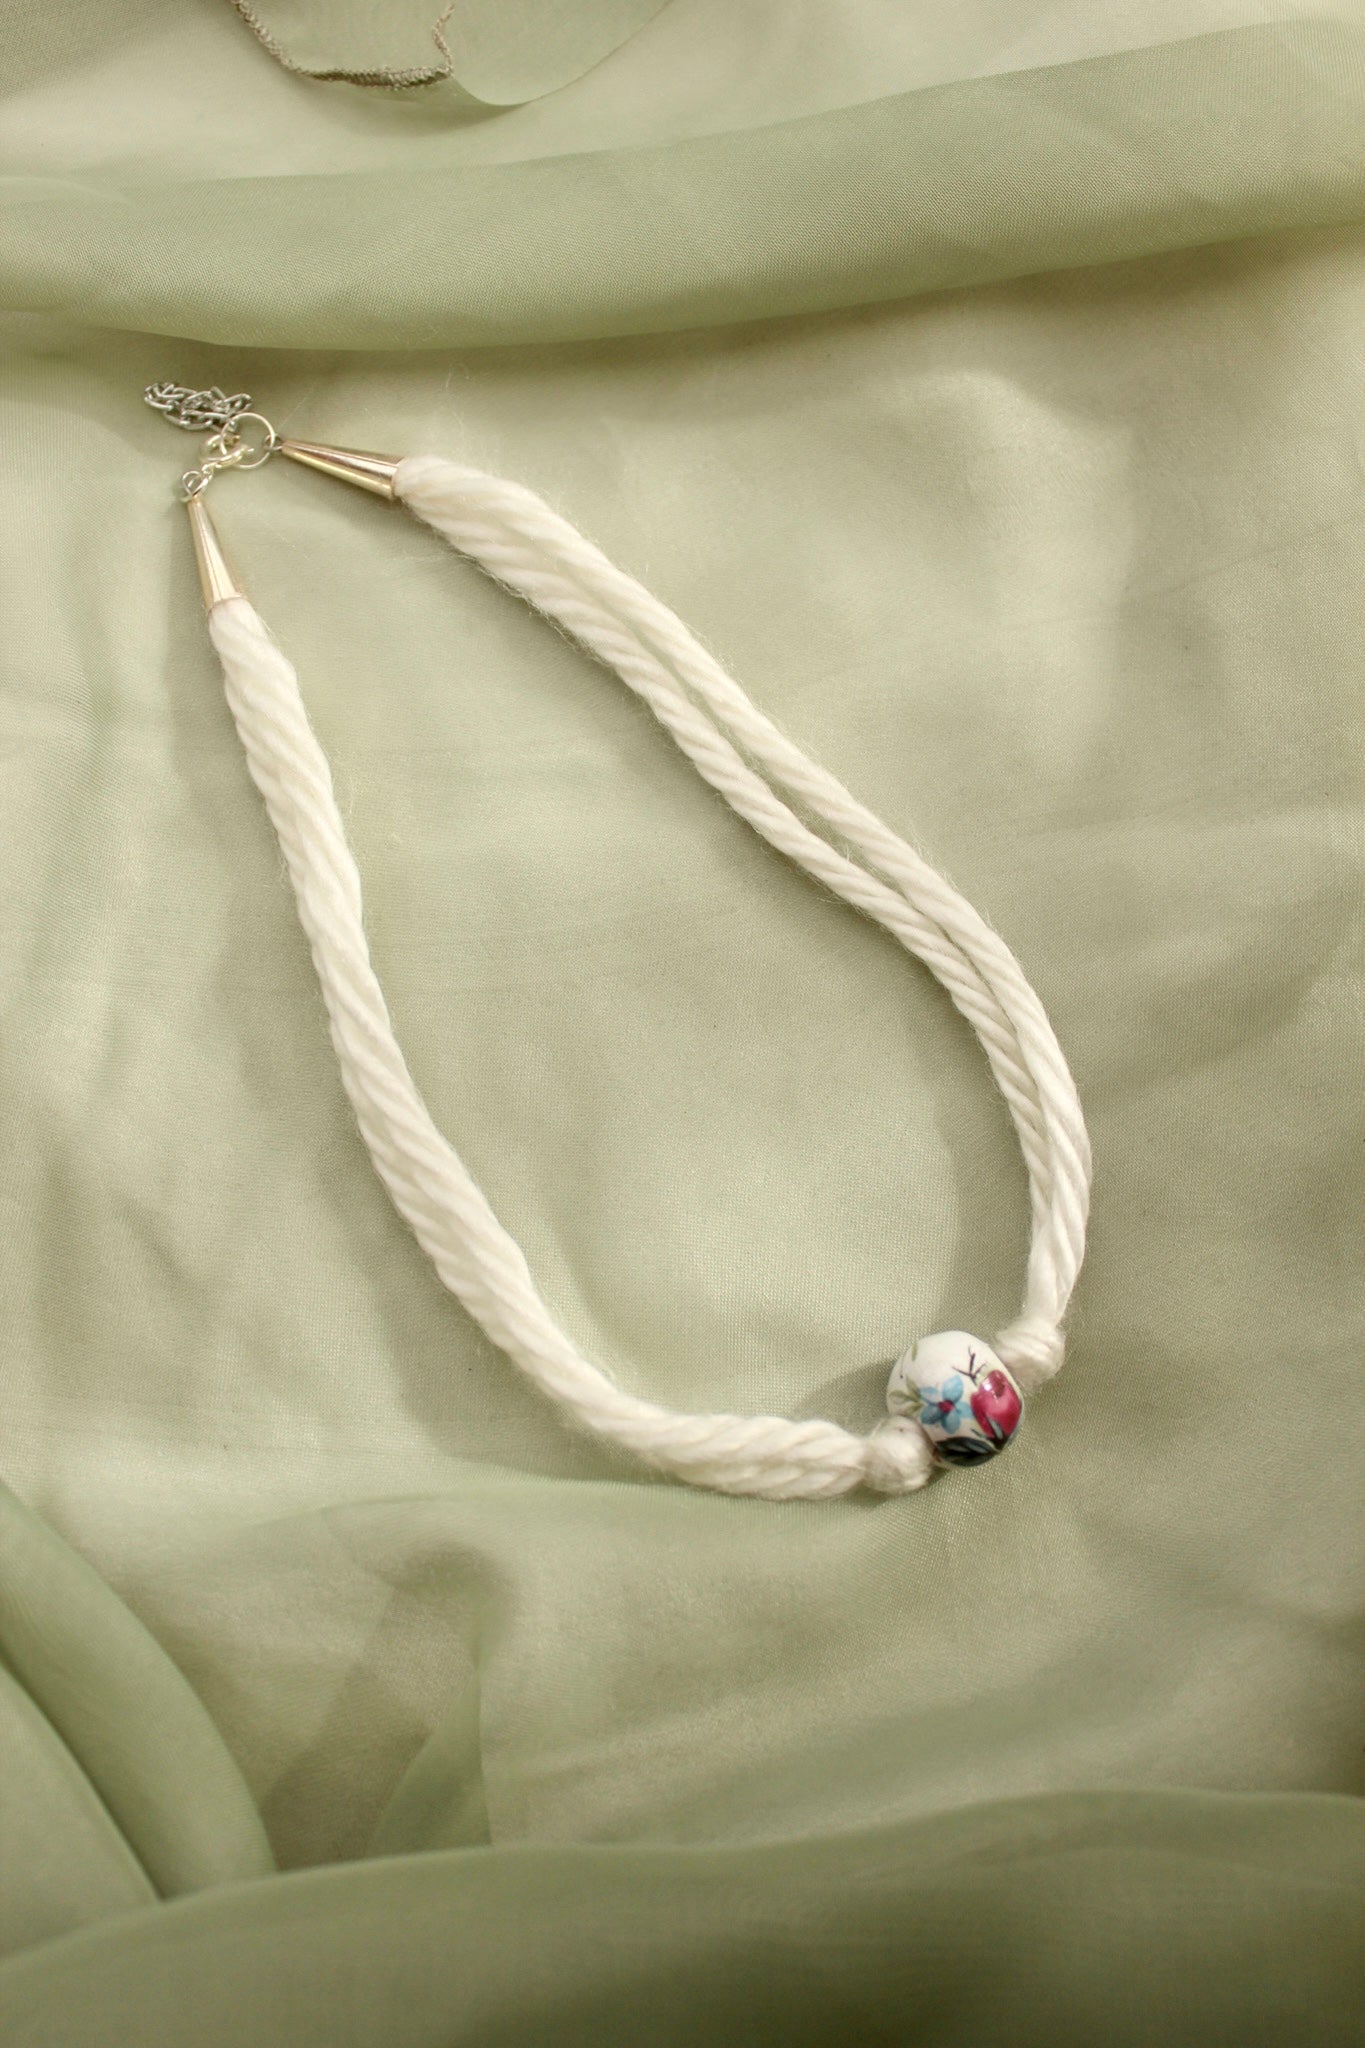 Soft White Yarn Cord Choker, Lovely Feel Vintage Style Center Floral Bead